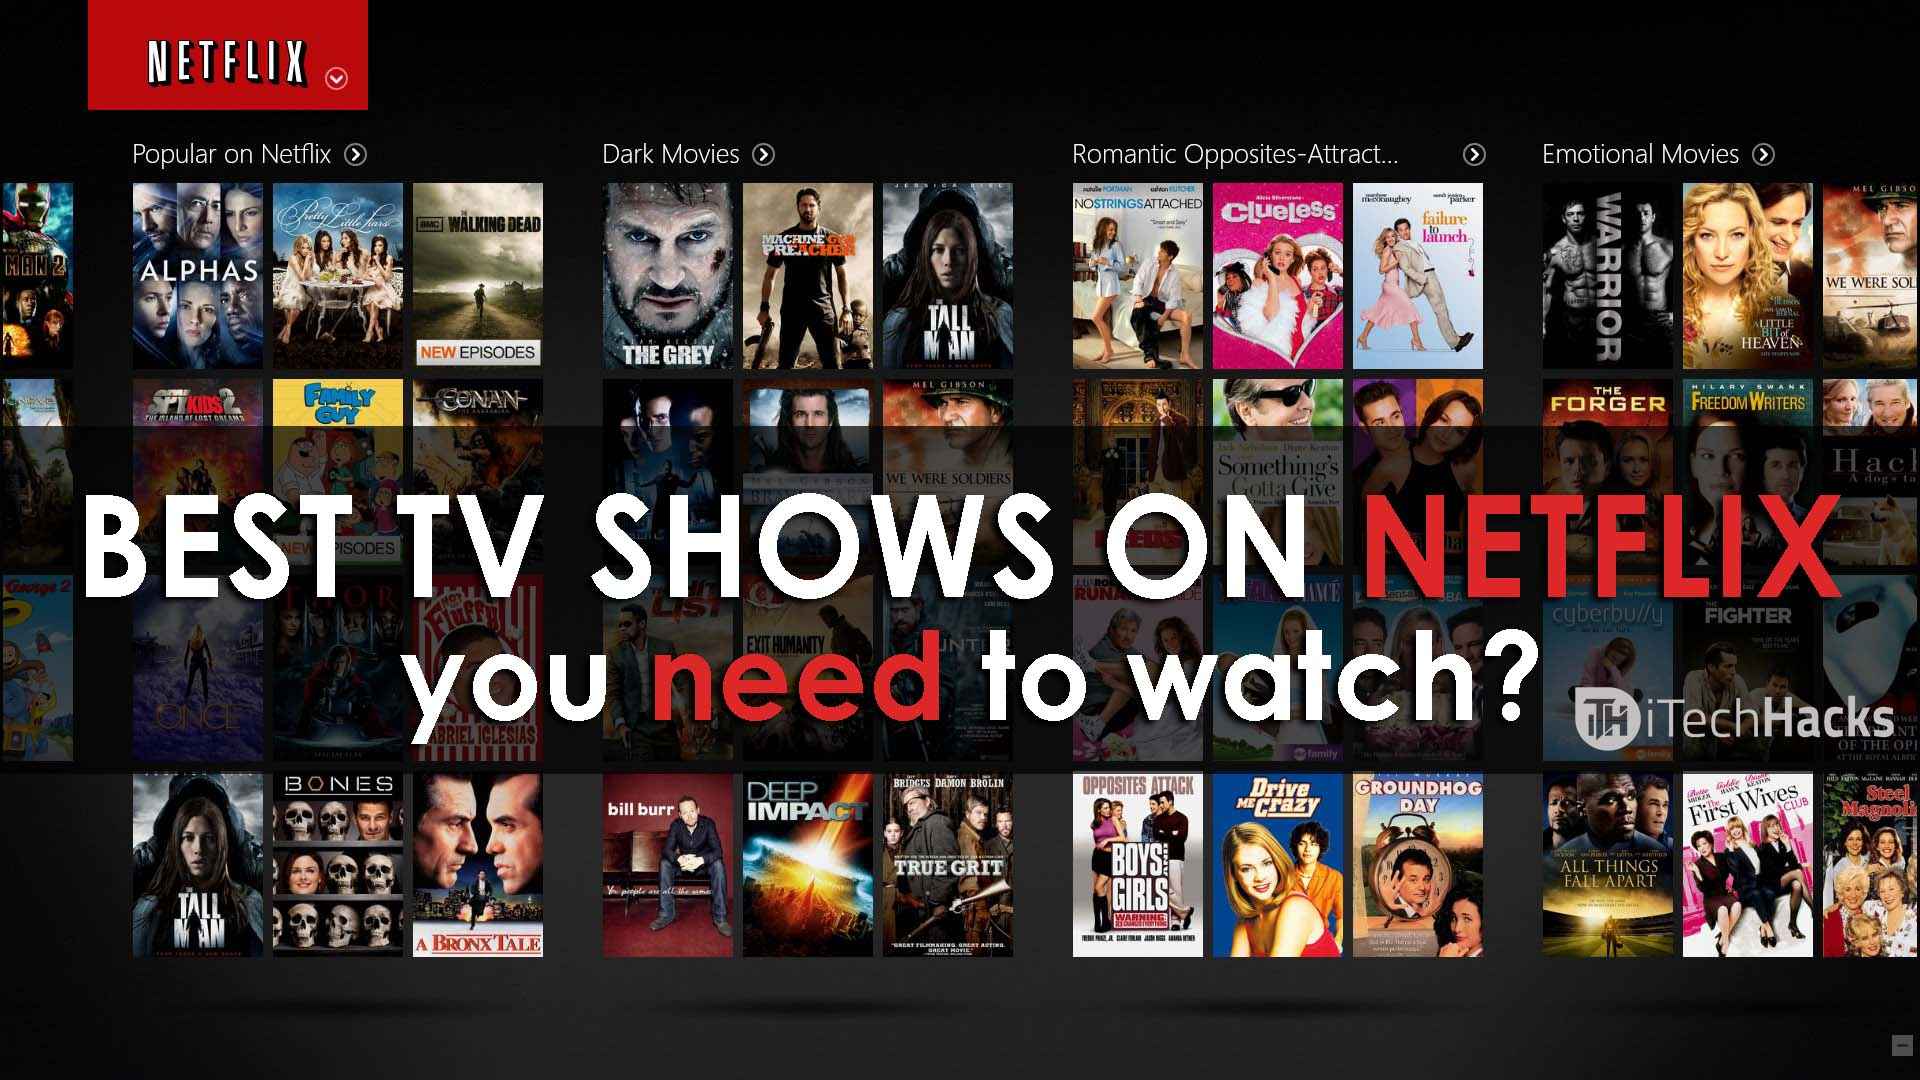 best app to watch netflix series for free